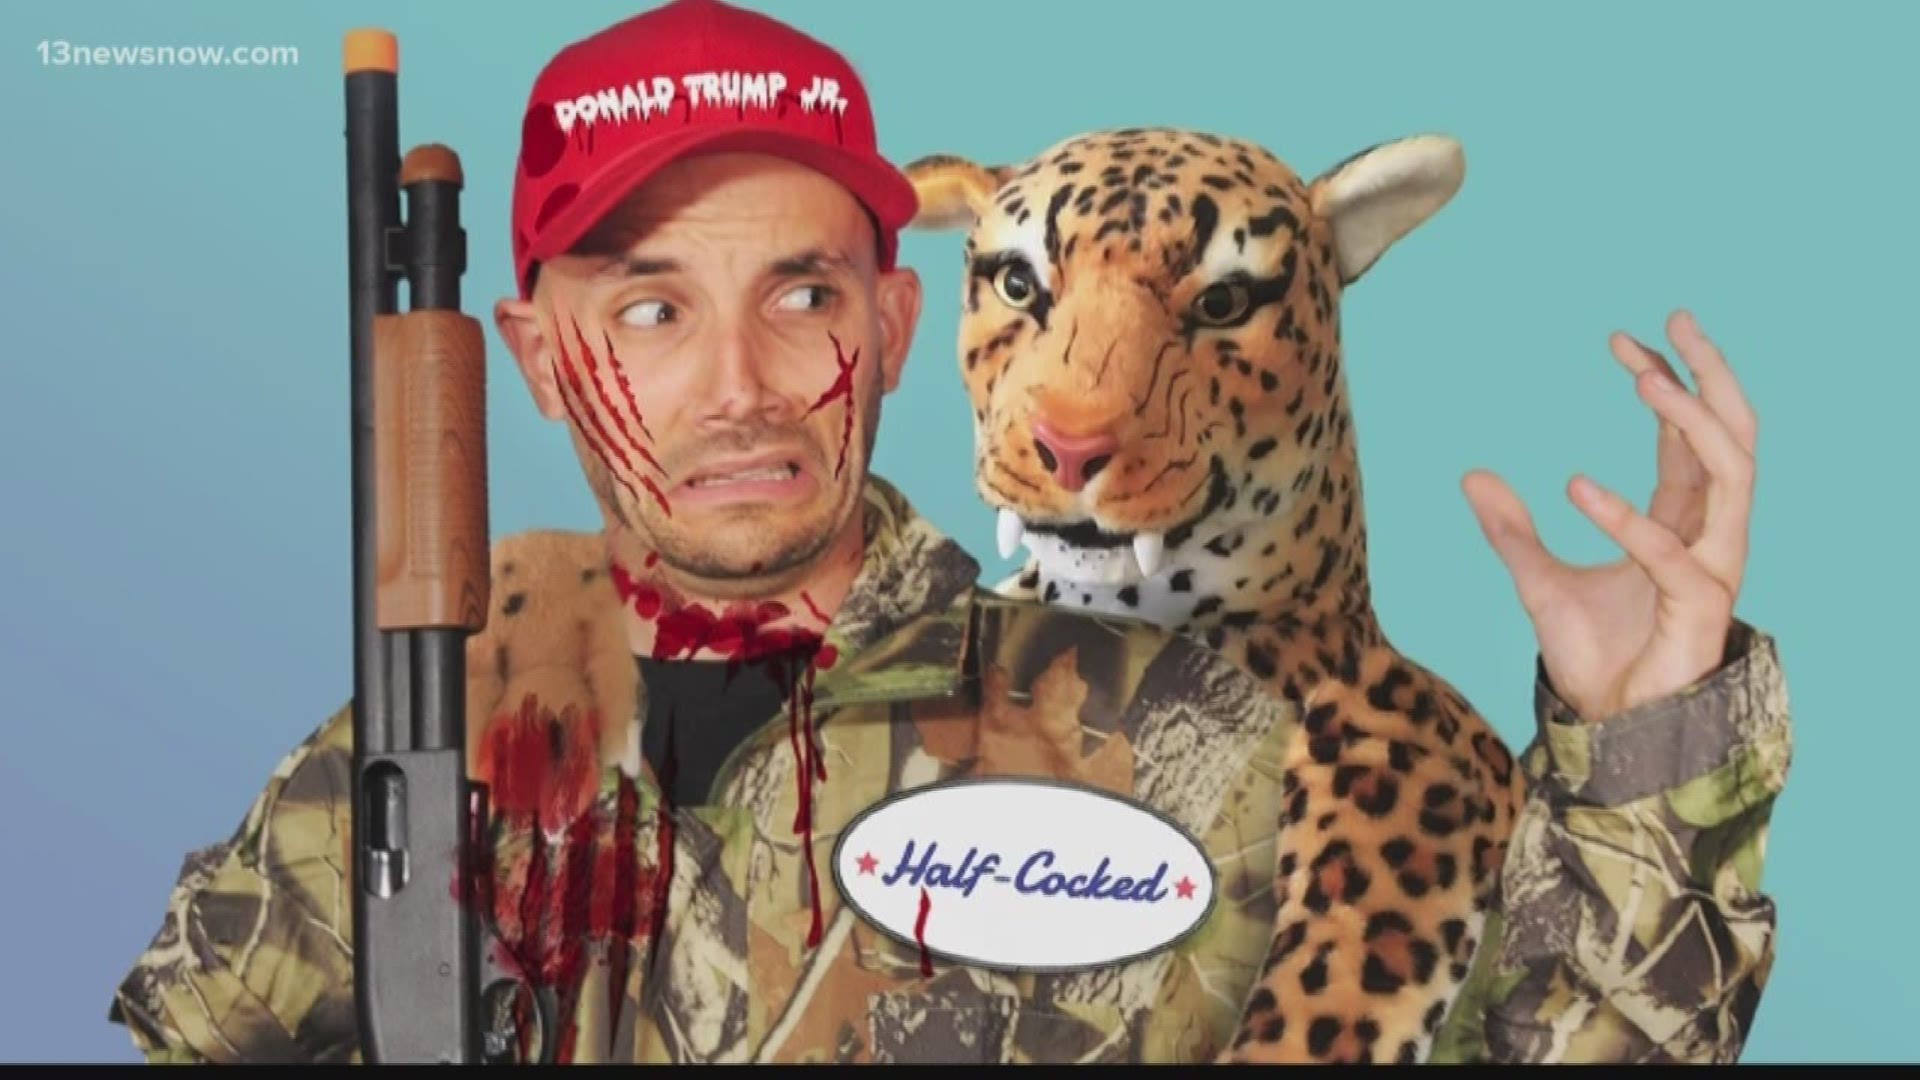 PETA is taking aim at the President's son.